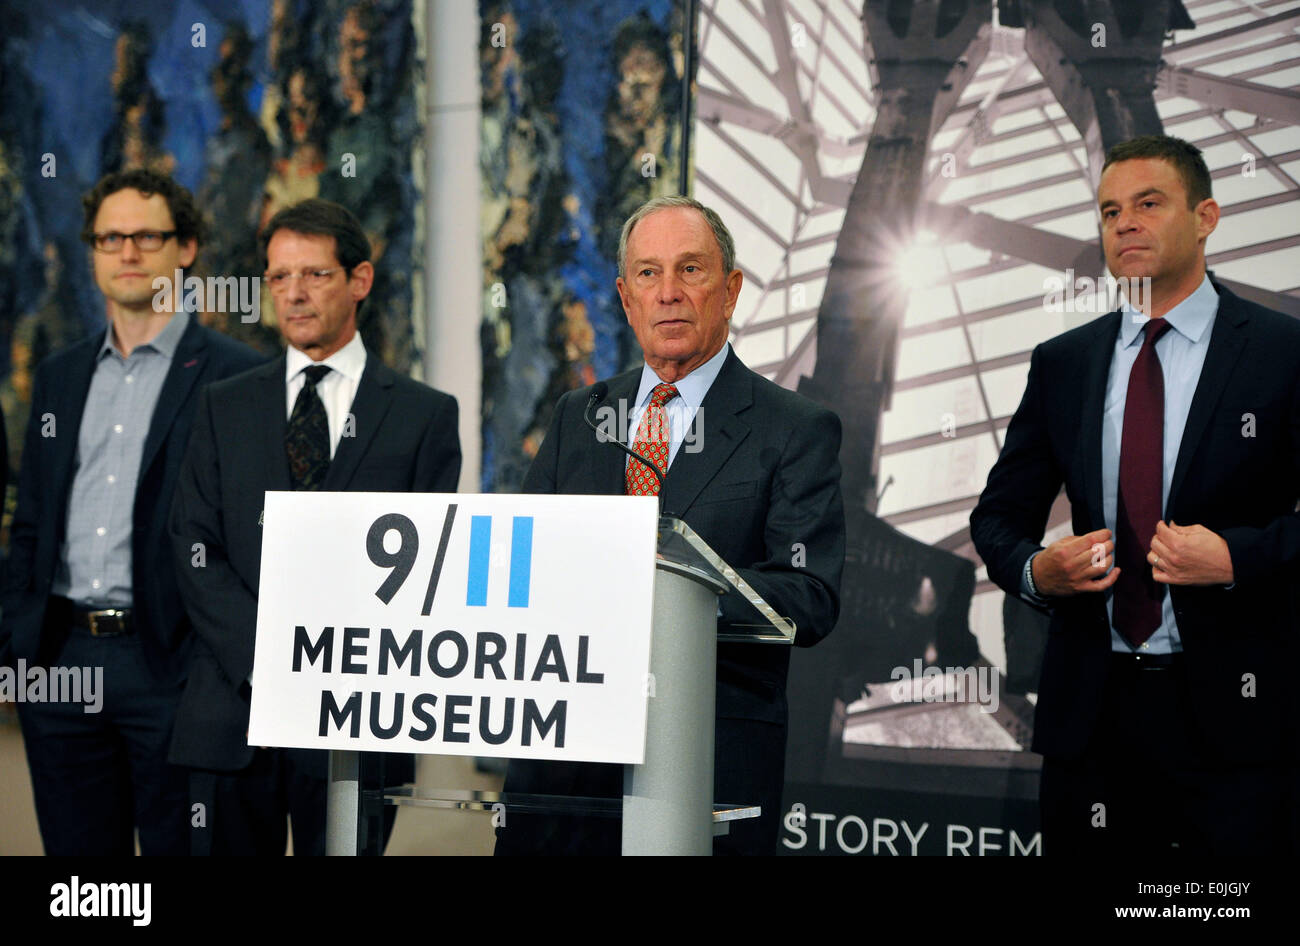 (140514) -- NEW YORK, May 14, 2014 (Xinhua) -- Michael Bloomberg (2nd R), Chairman of the 9/11 Memorial Museum and Mayor of New York City from 2002-2013 delivers a speech during a preview of the National September 11 Memorial Museum in New York, May 14, 2014. The National September 11 Memorial Museum will serve as the country's principal institution for examining the implications of the events of 9/11, documenting the impact of those events and exploring the continuing significance of September 11, 2001. The Museum's 110,000 square feet of exhibition space is located within the archaeological Stock Photo